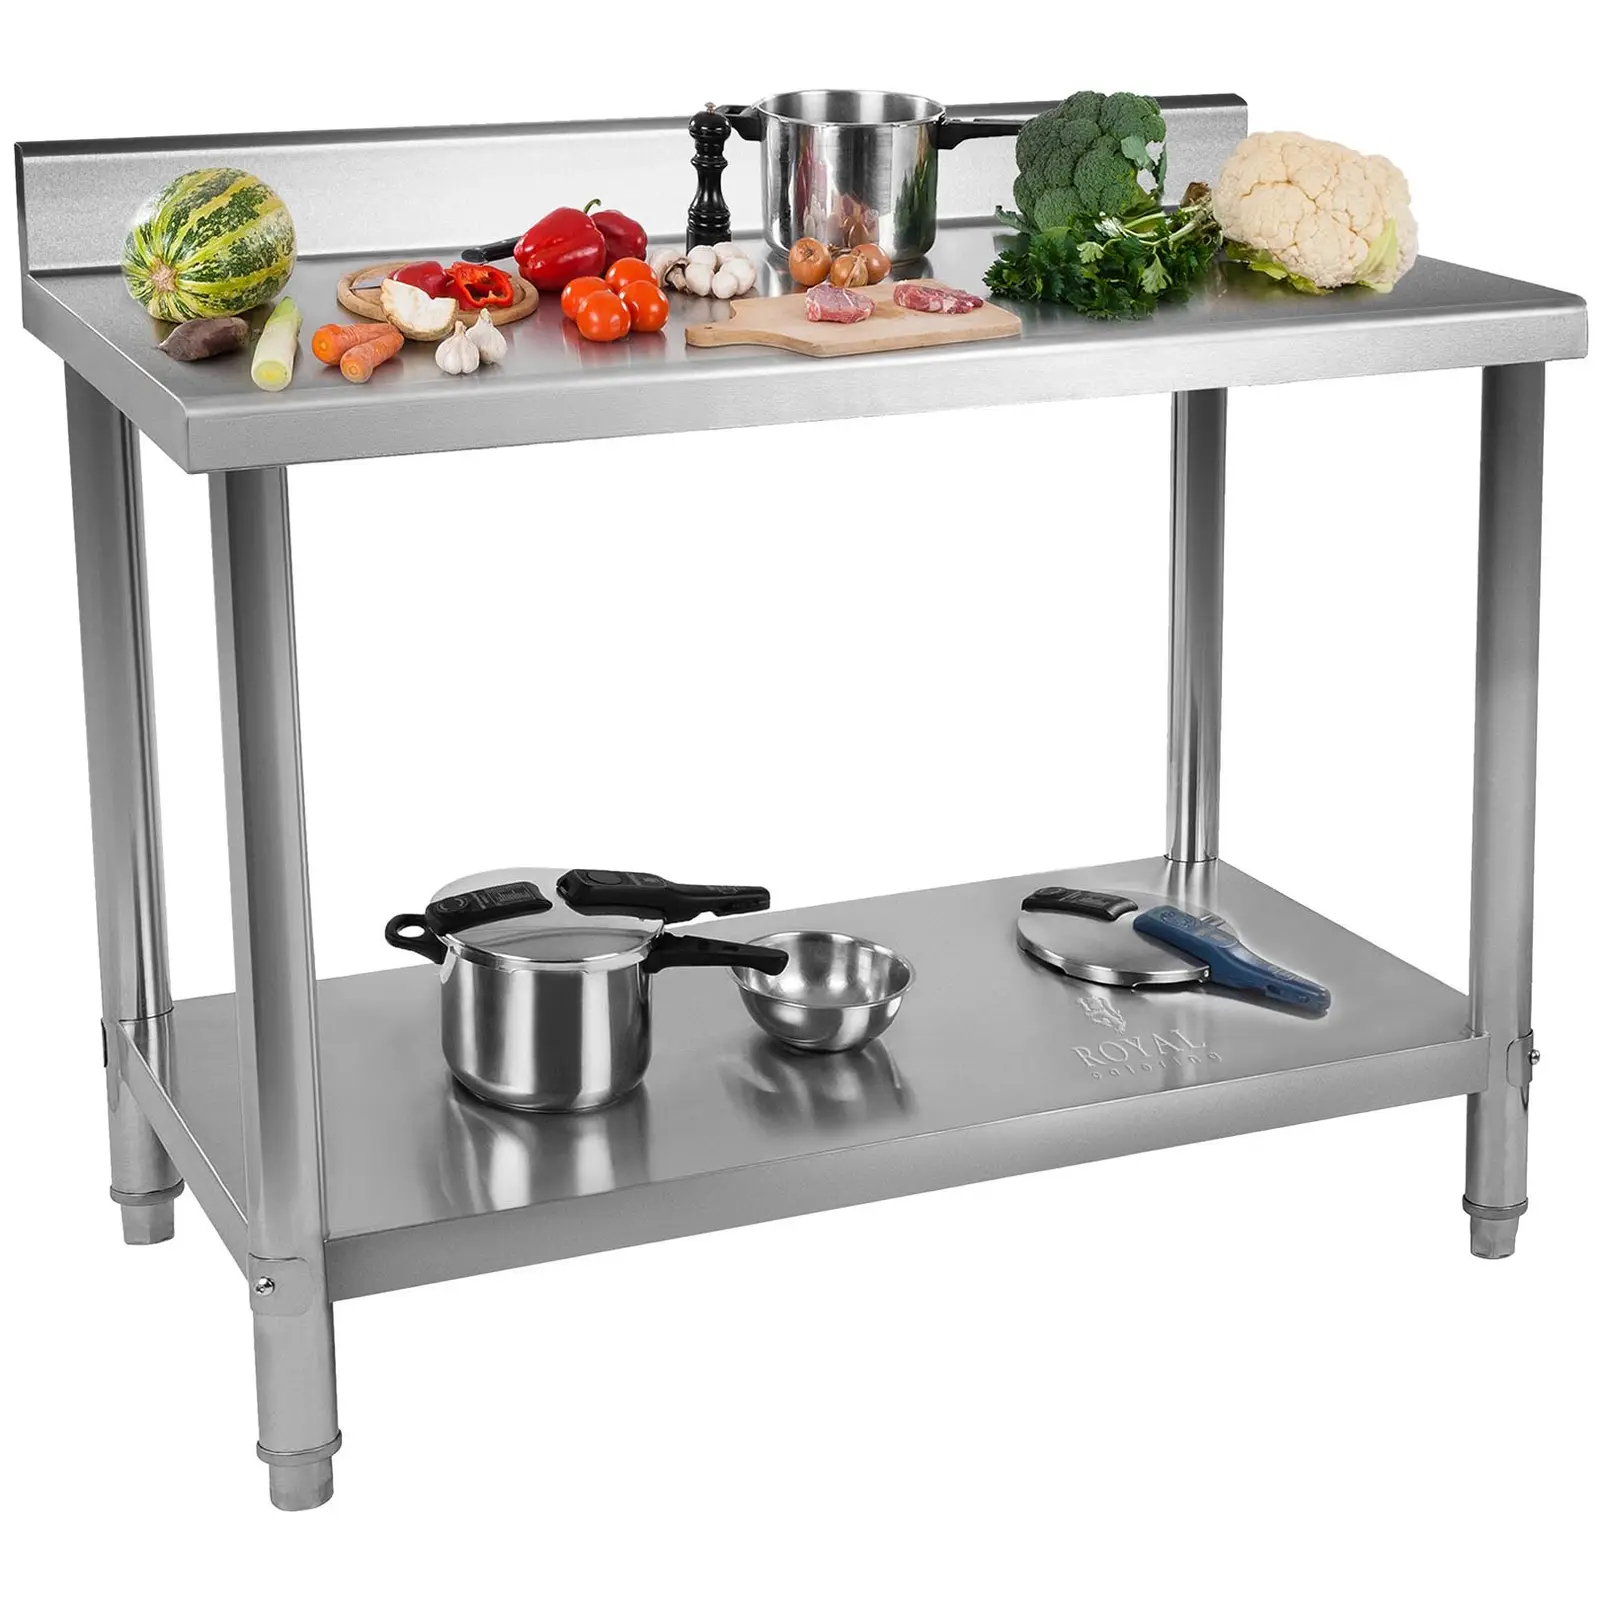 Stainless Steel Table - 120 x 70 cm - Upstand